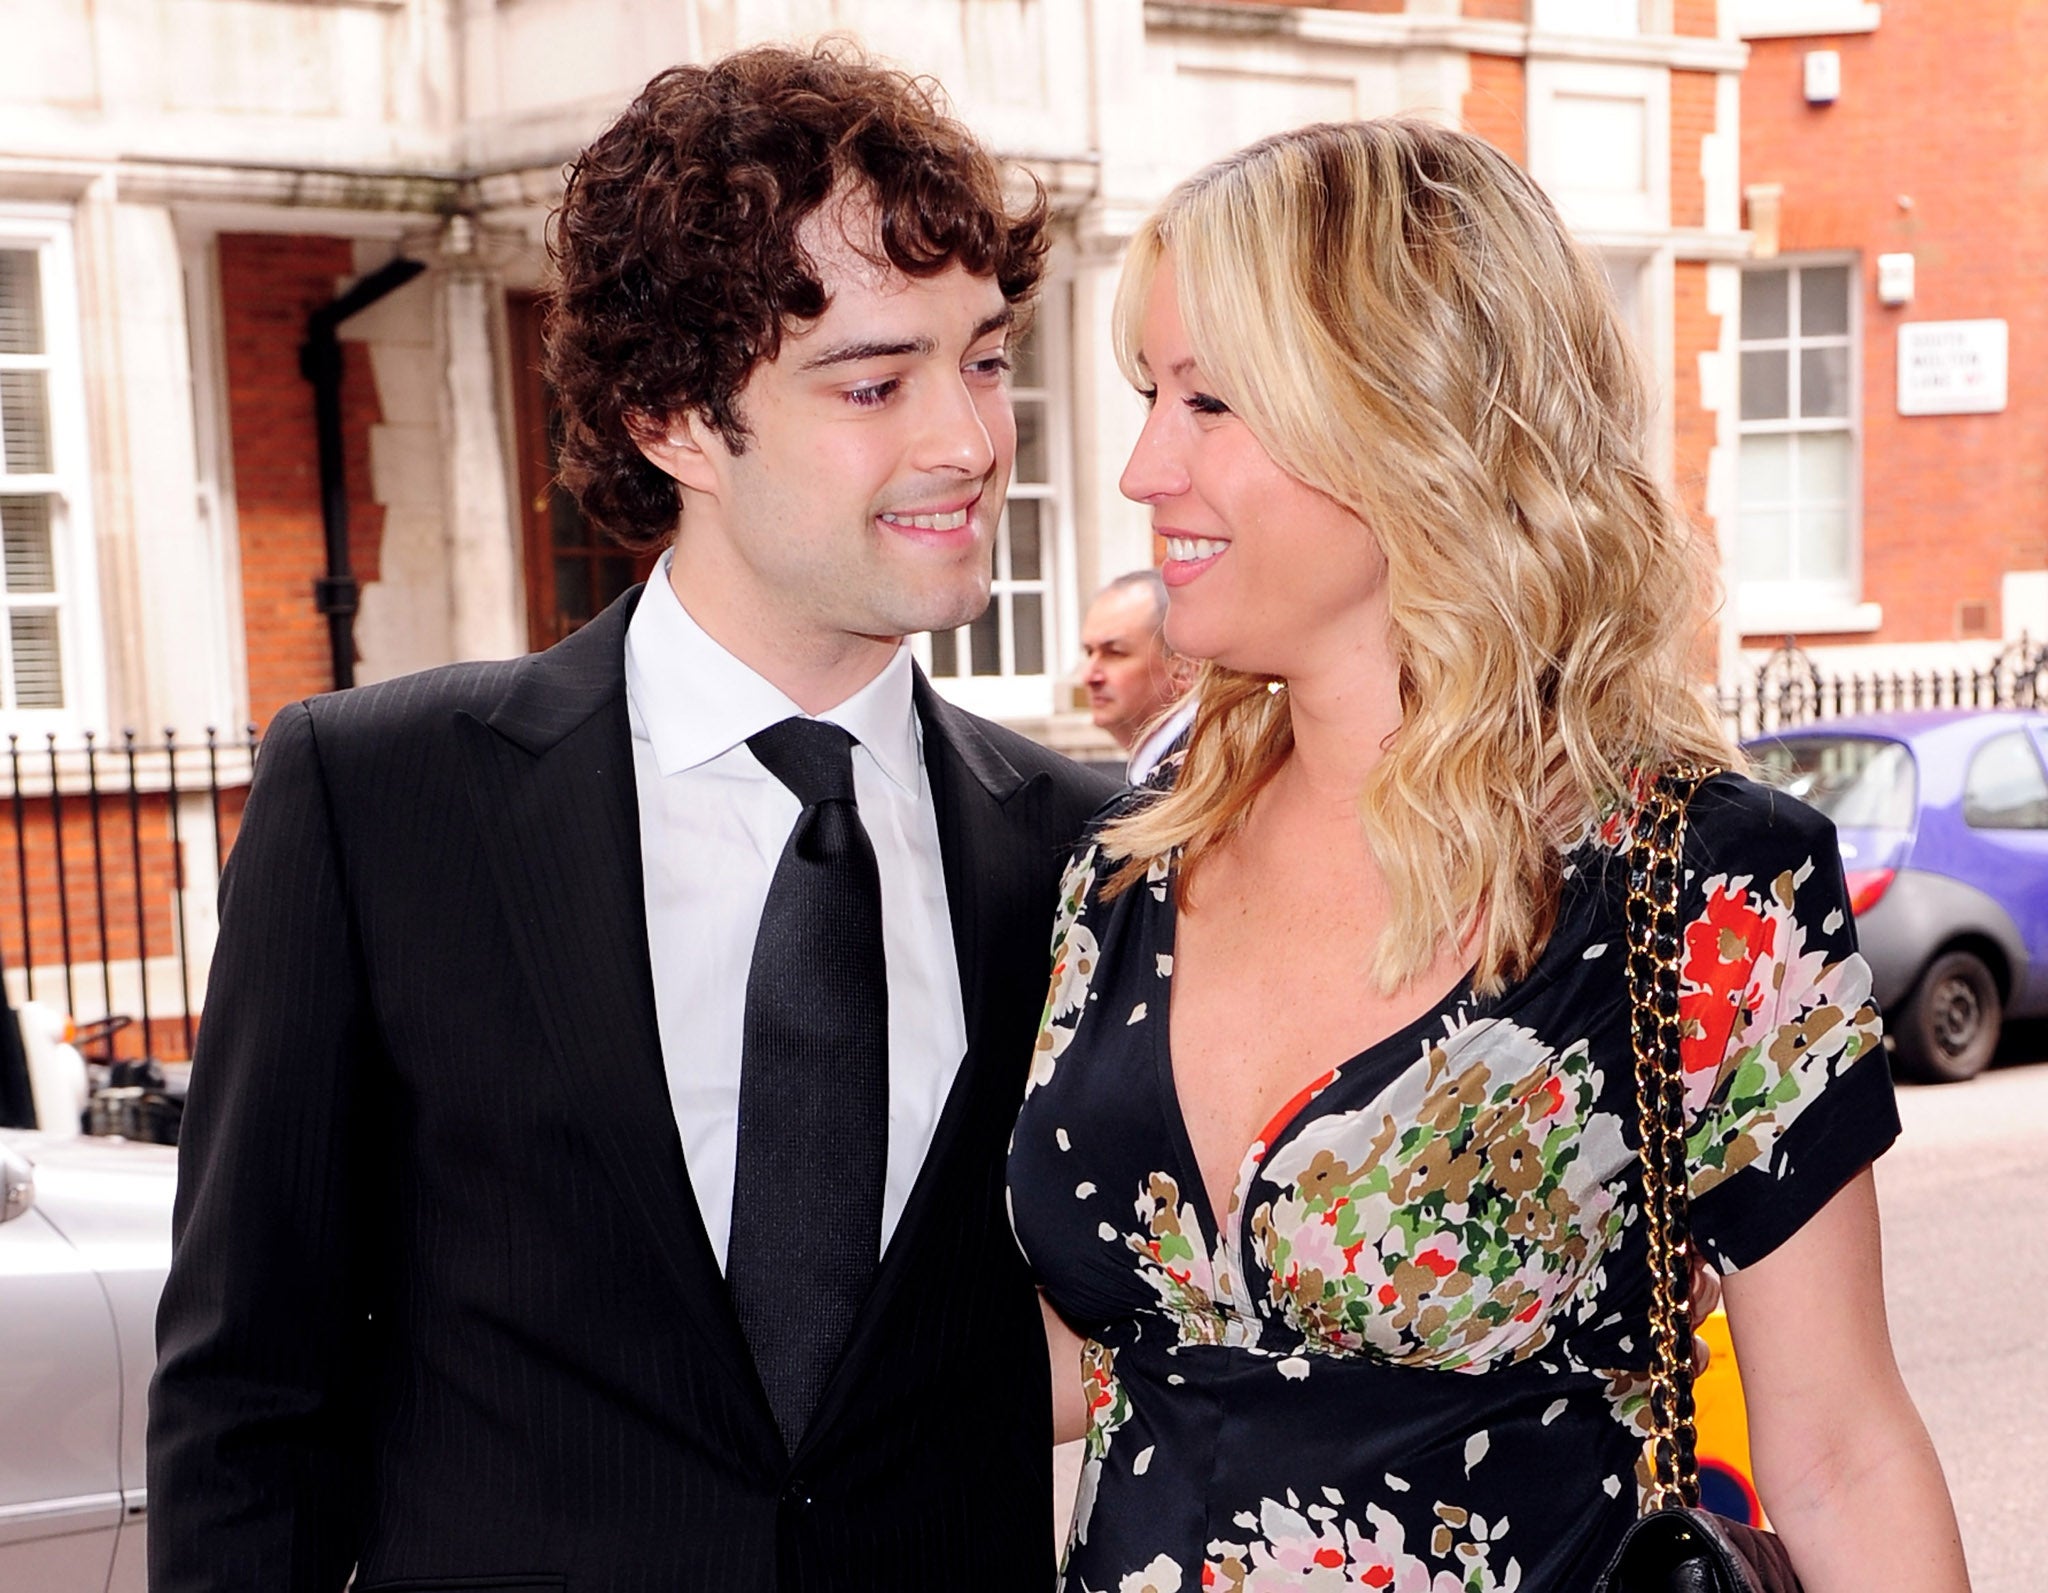 Lee Mead and Denise van Outen pictured together in 2010.